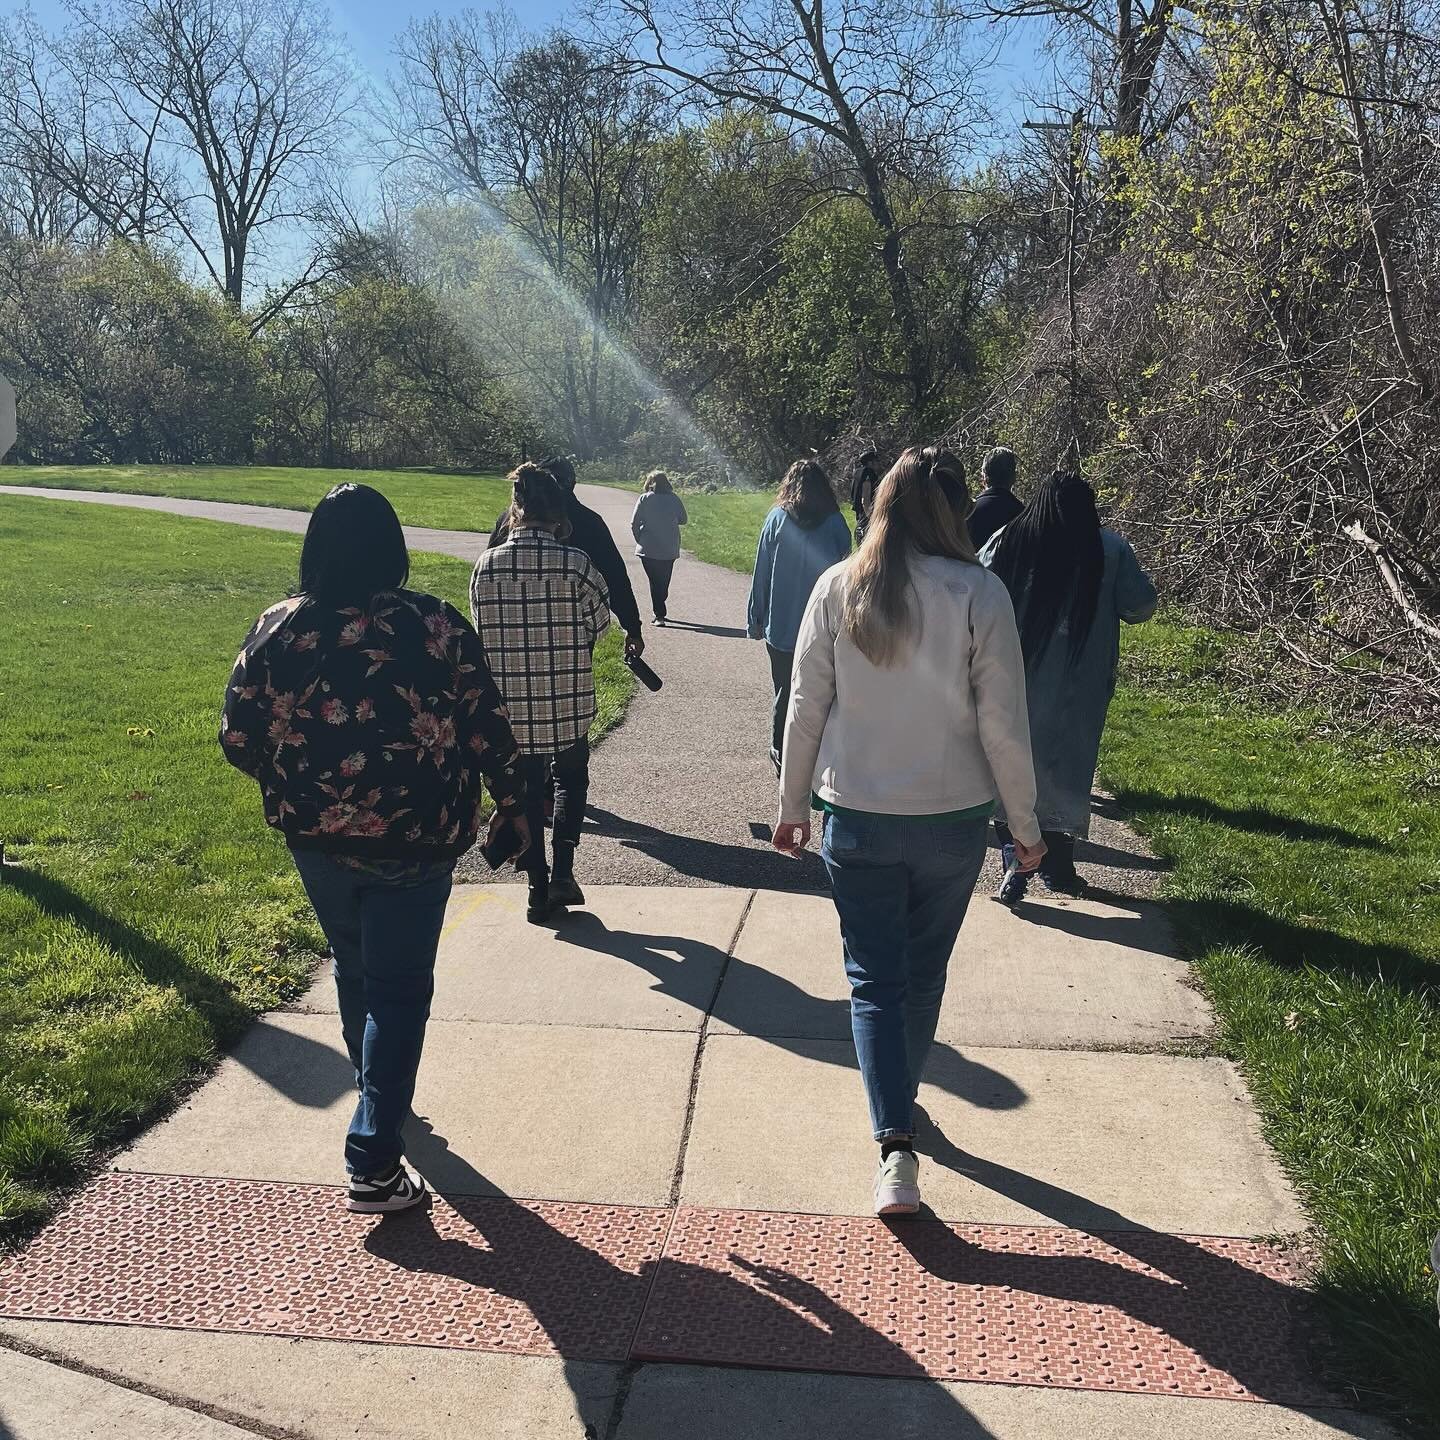 Communicare members put the ART in Earth Day! While enjoying the sunshine, members used flowers and leaves found along their walk in the park to create beautiful cyanotype images 🌏

#cmi #tbi #communicaremichiganllc #utica #troy #earthday